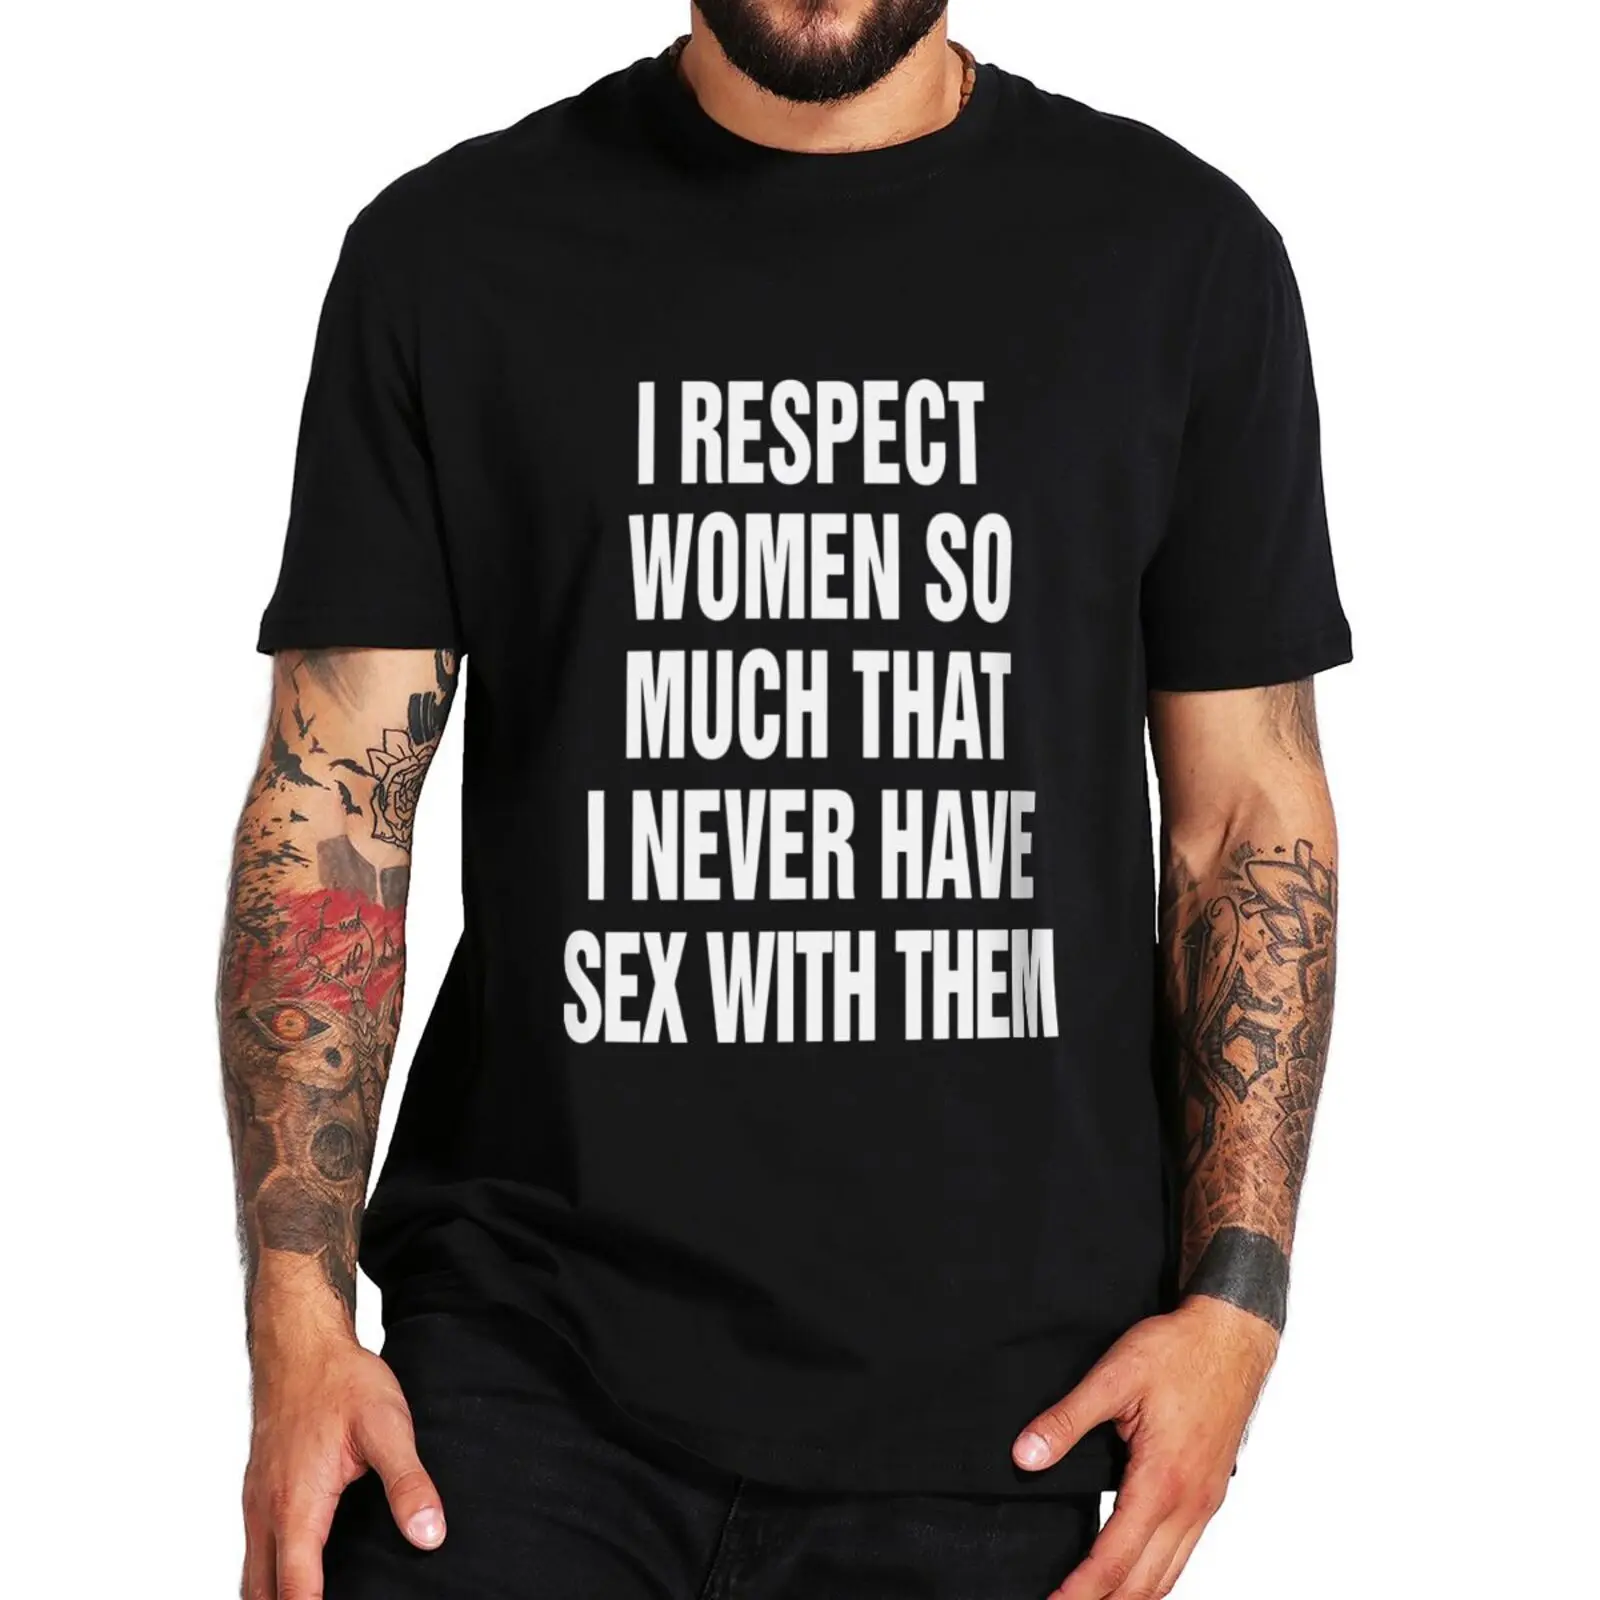 

I Respect Women So Much That I Never Have Sex With Them T Shirt Adult Humor Funny Tops 100% Cotton Unisex Soft Tshirts EU Size